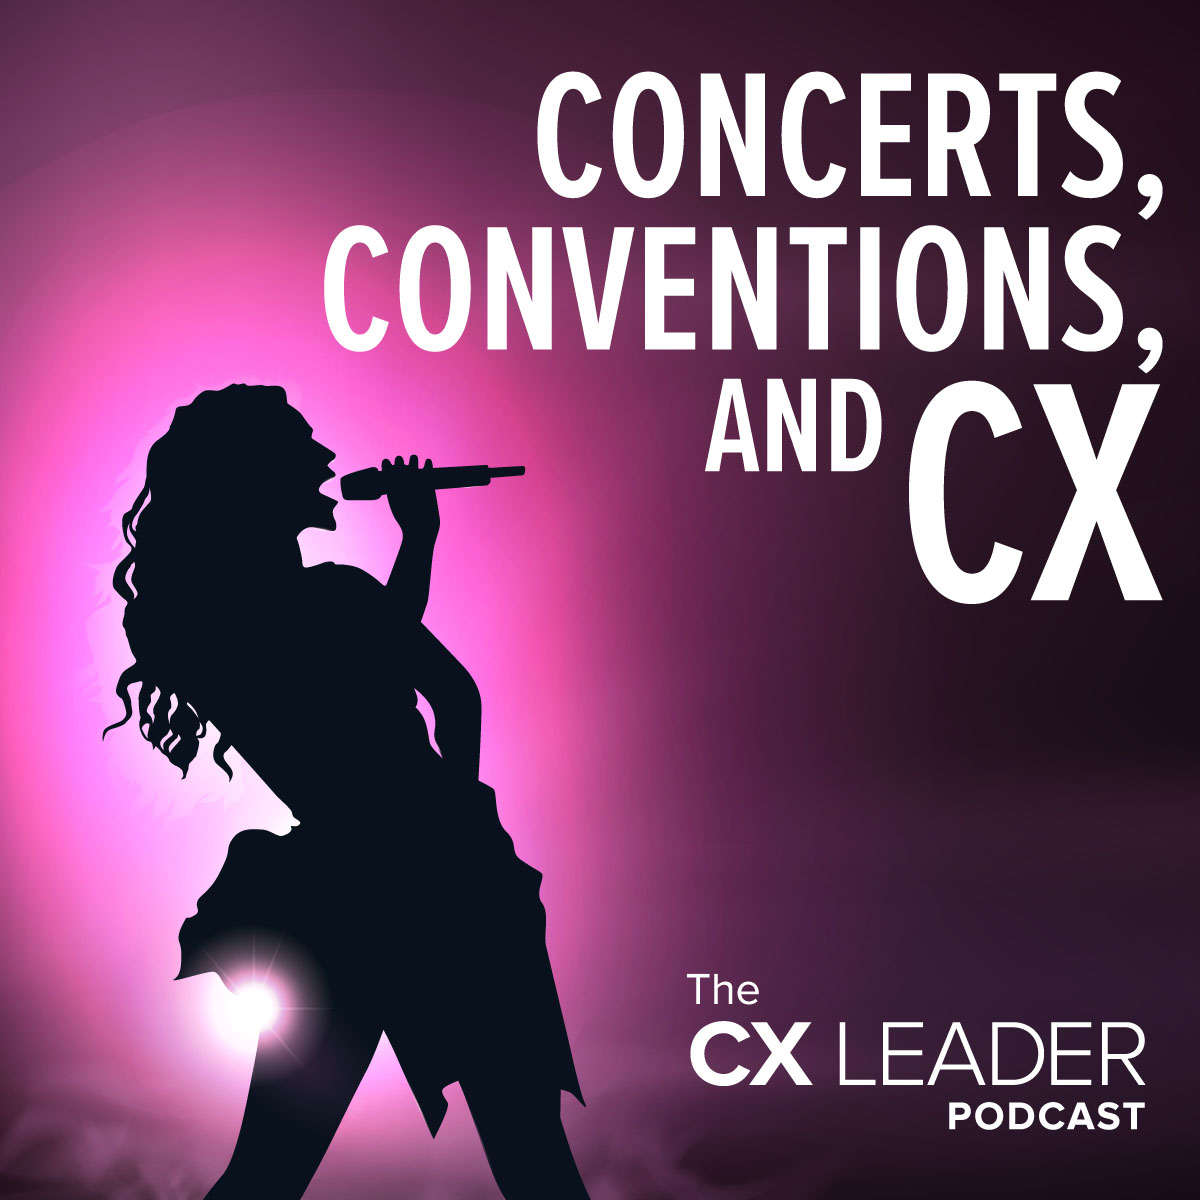 Concerts, Conventions, and CX